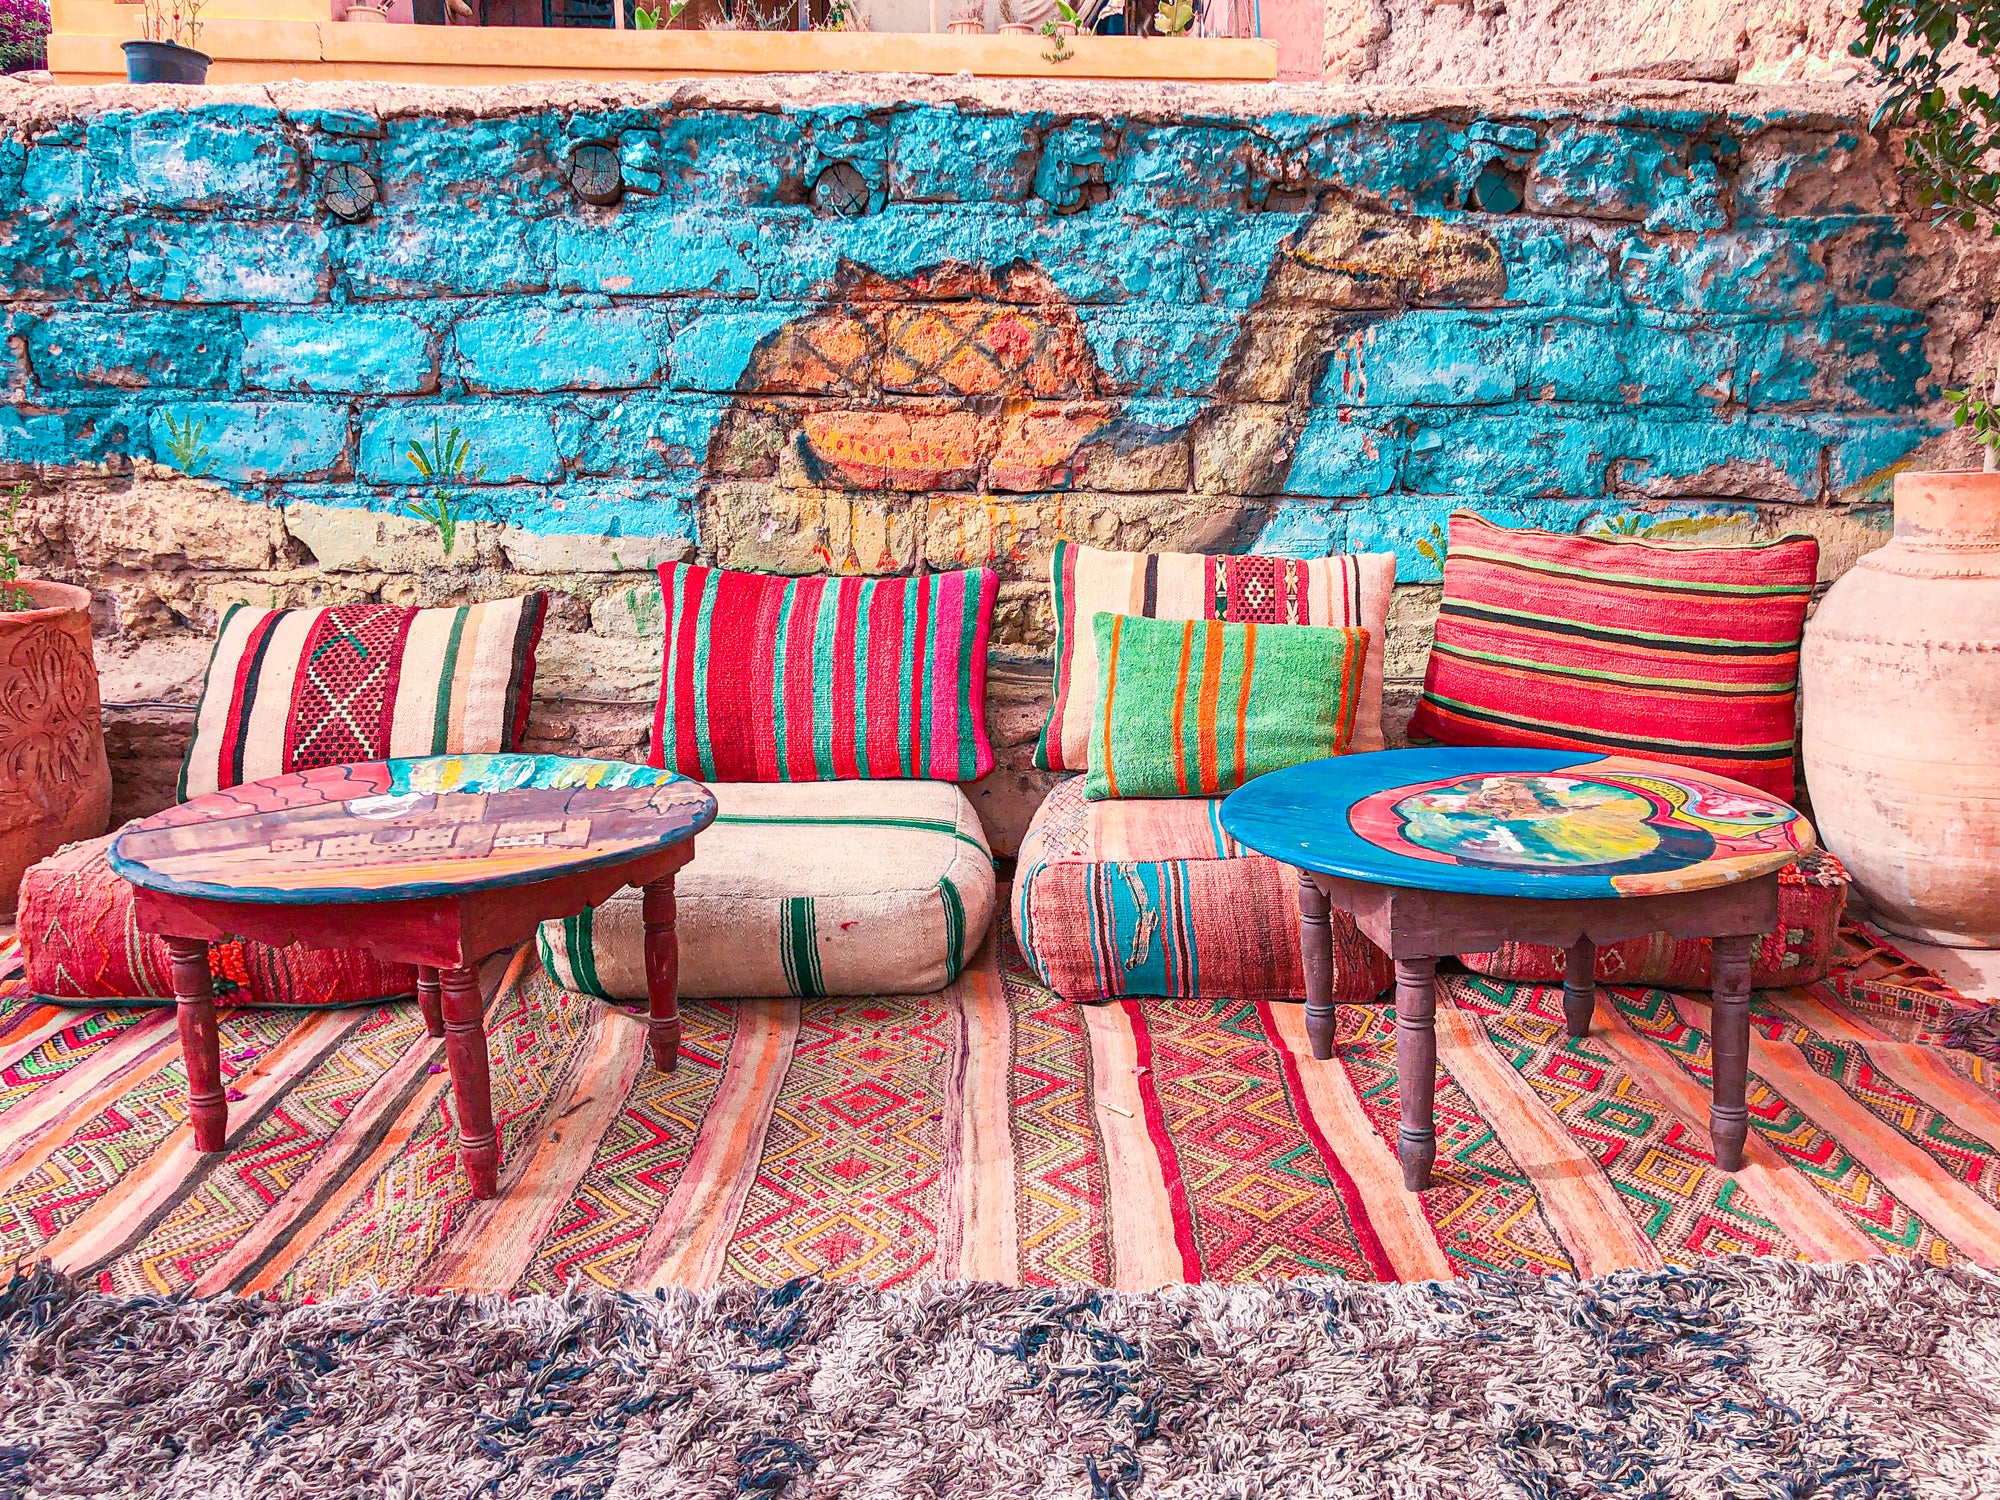 THE BEAUTIFUL HISTORY OF THE ANCESTRAL MOROCCAN RUGS